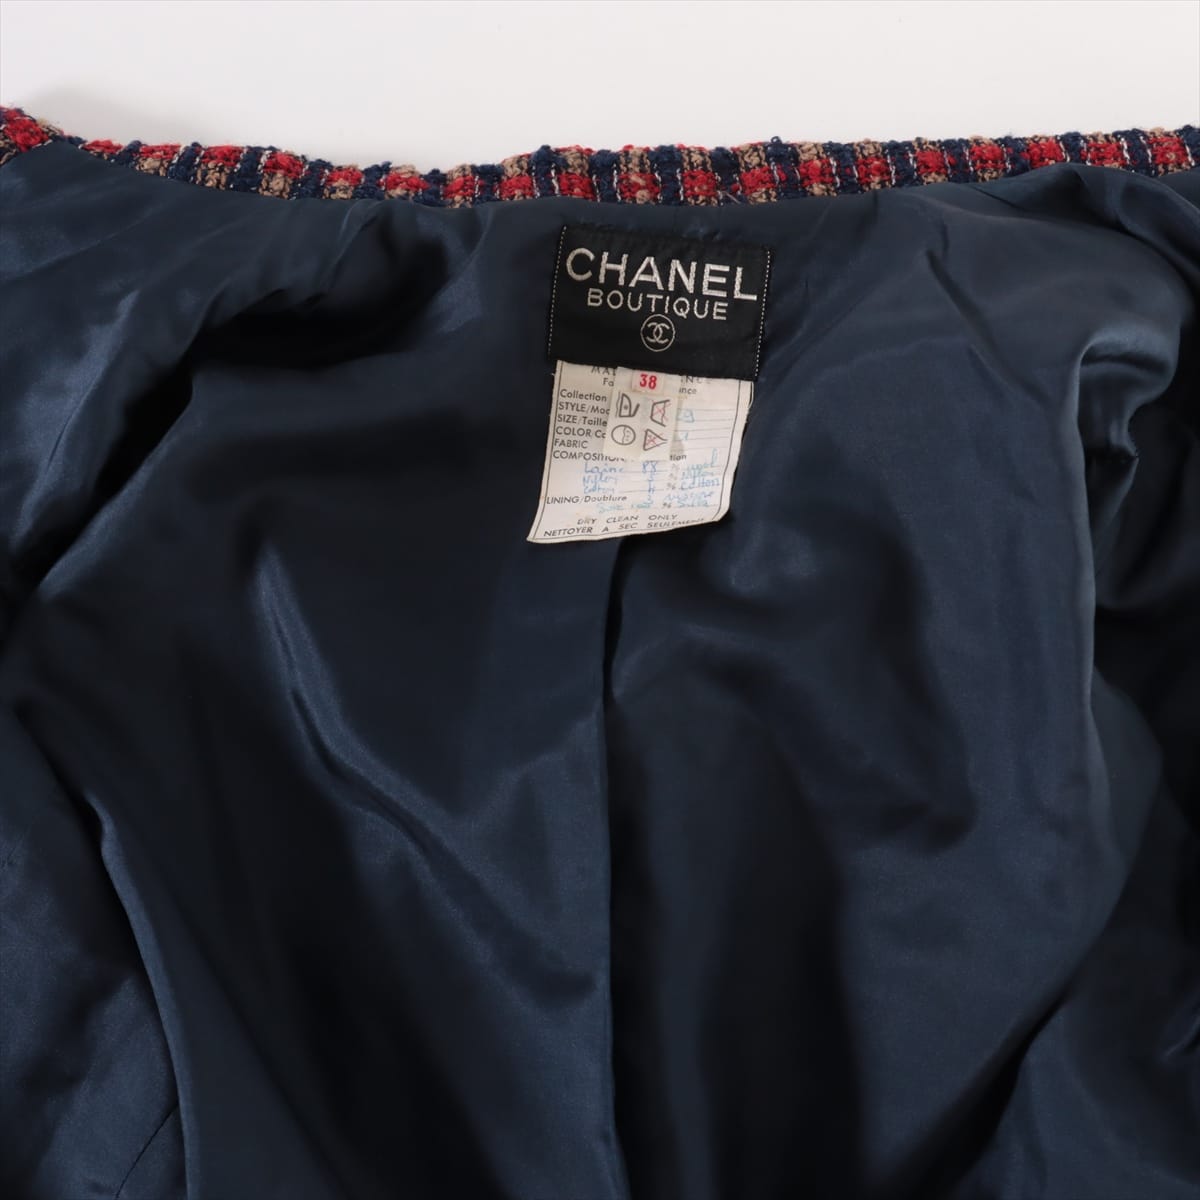 Chanel Coco Button Tweed Setup 38 Ladies' Navy x red